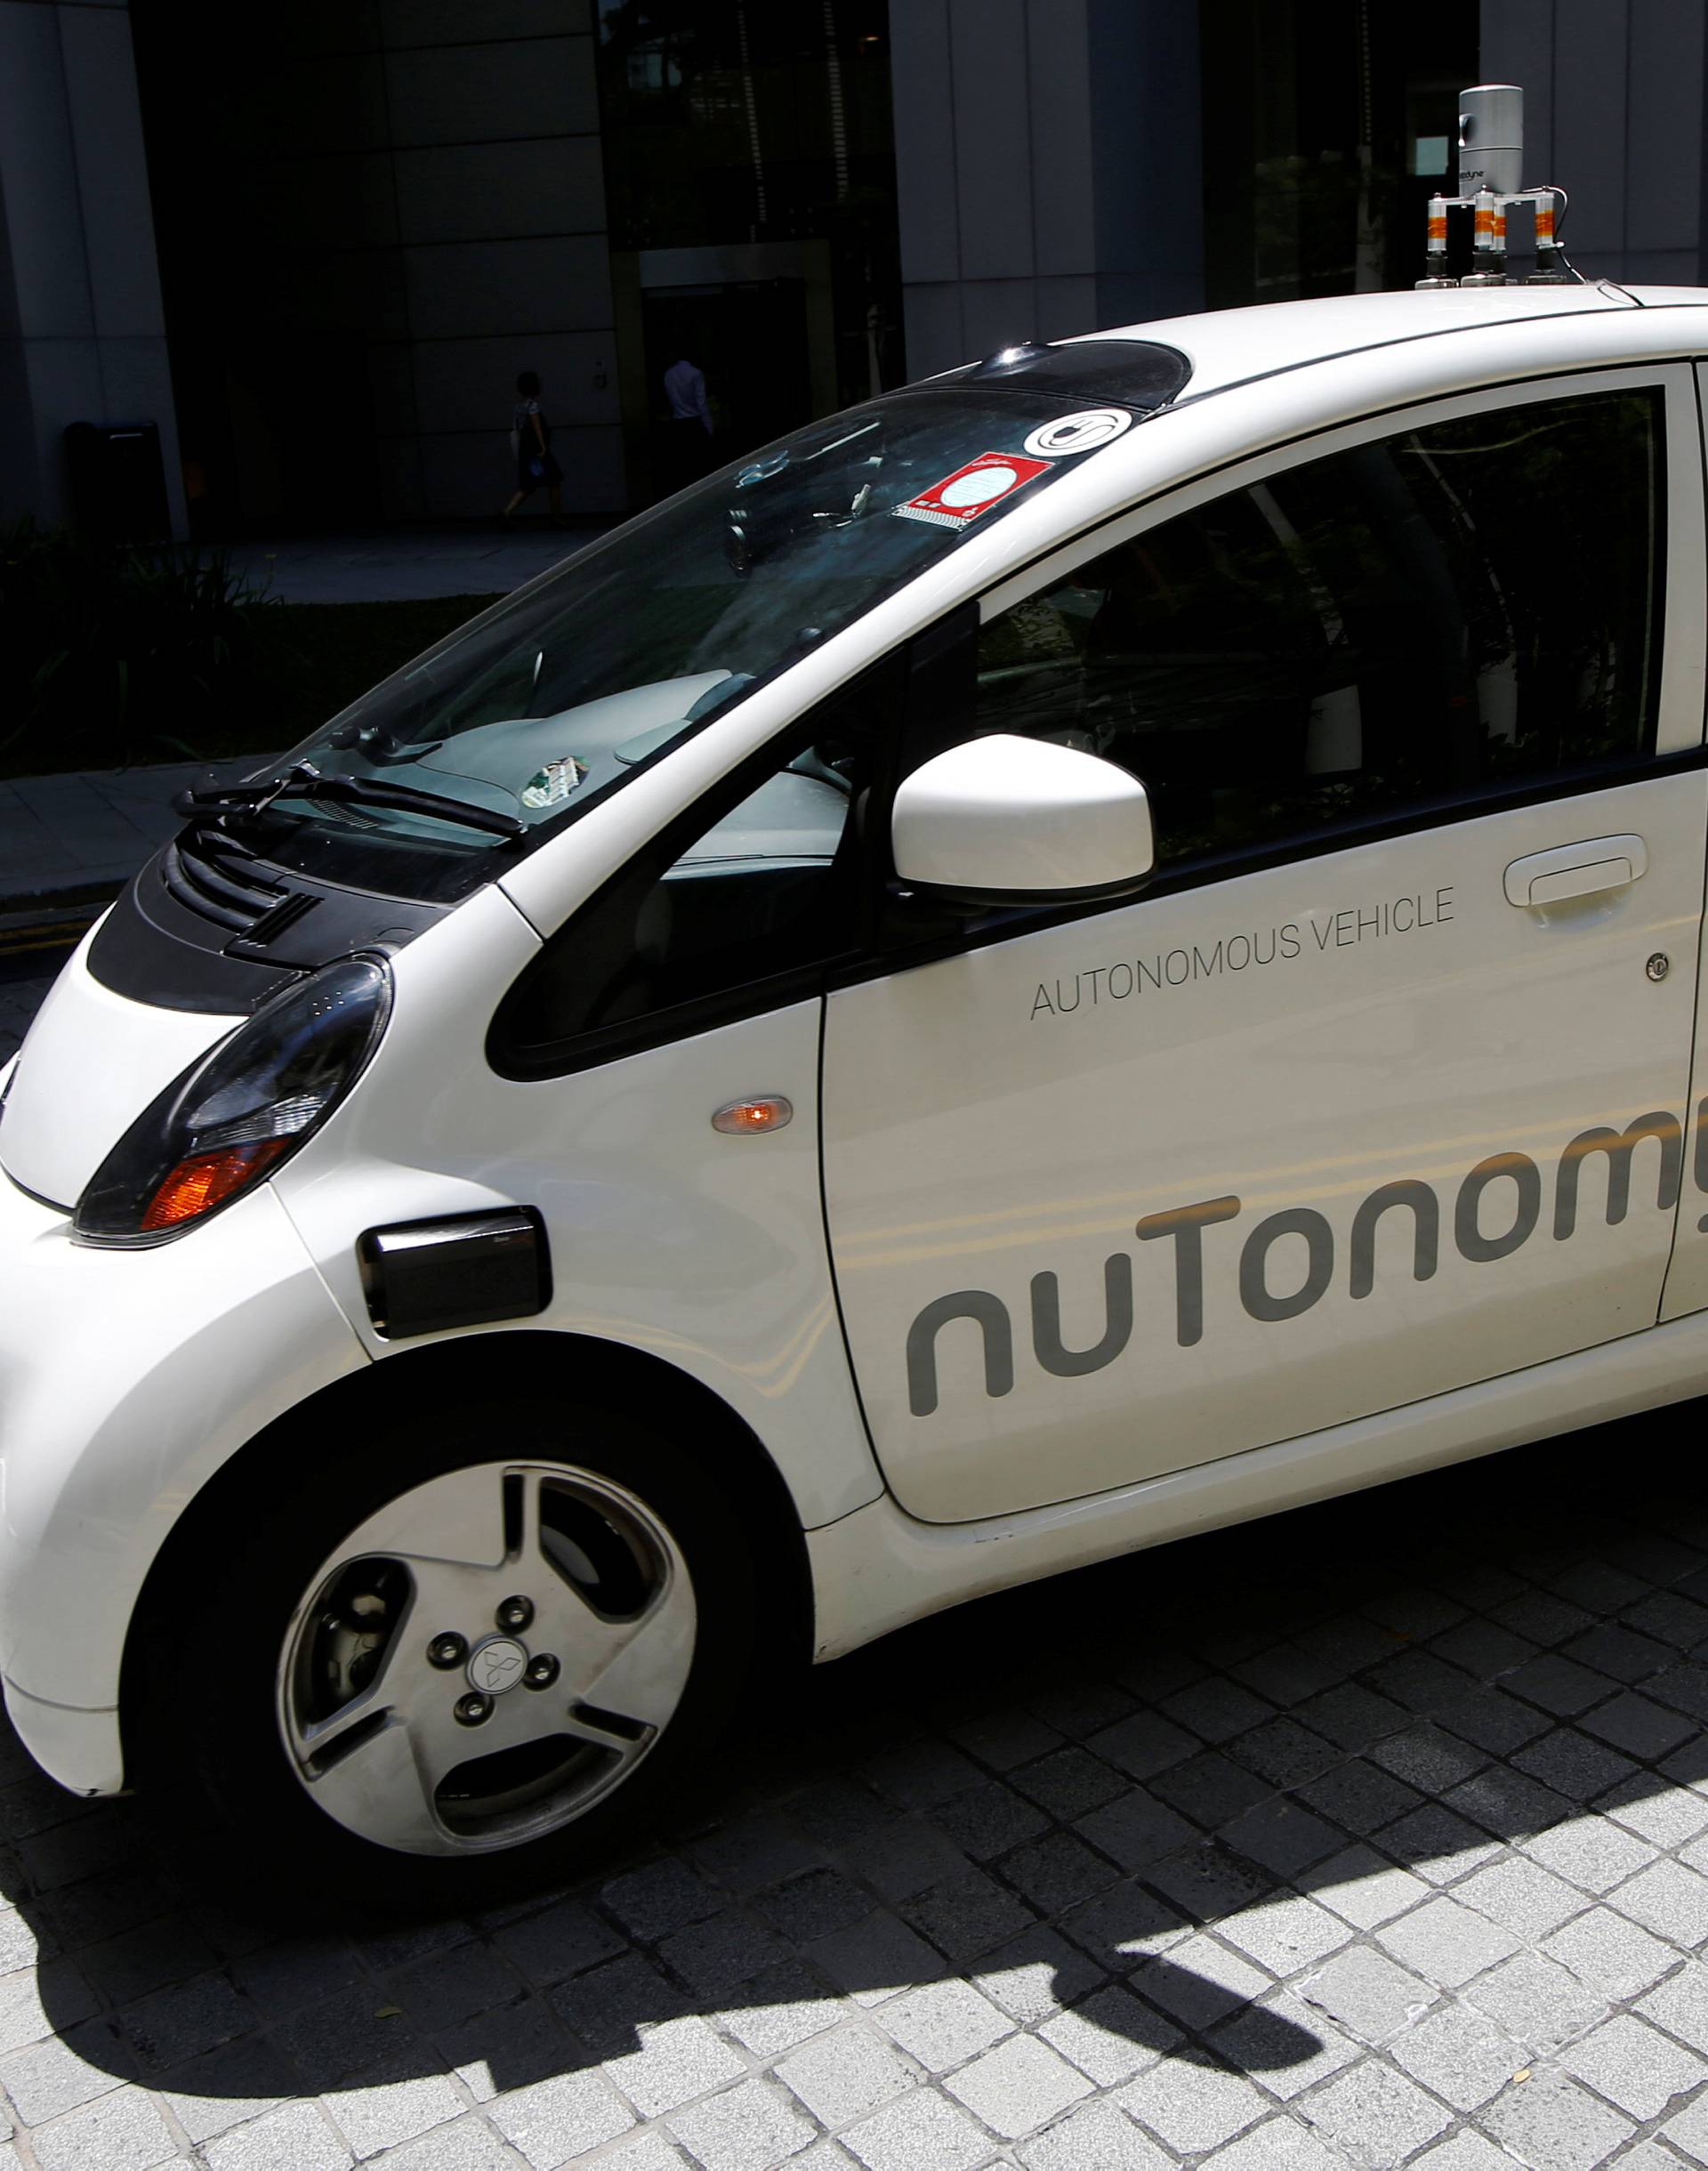 A nuTonomy self-driving taxi drives on the road in its public trial in Singapore 